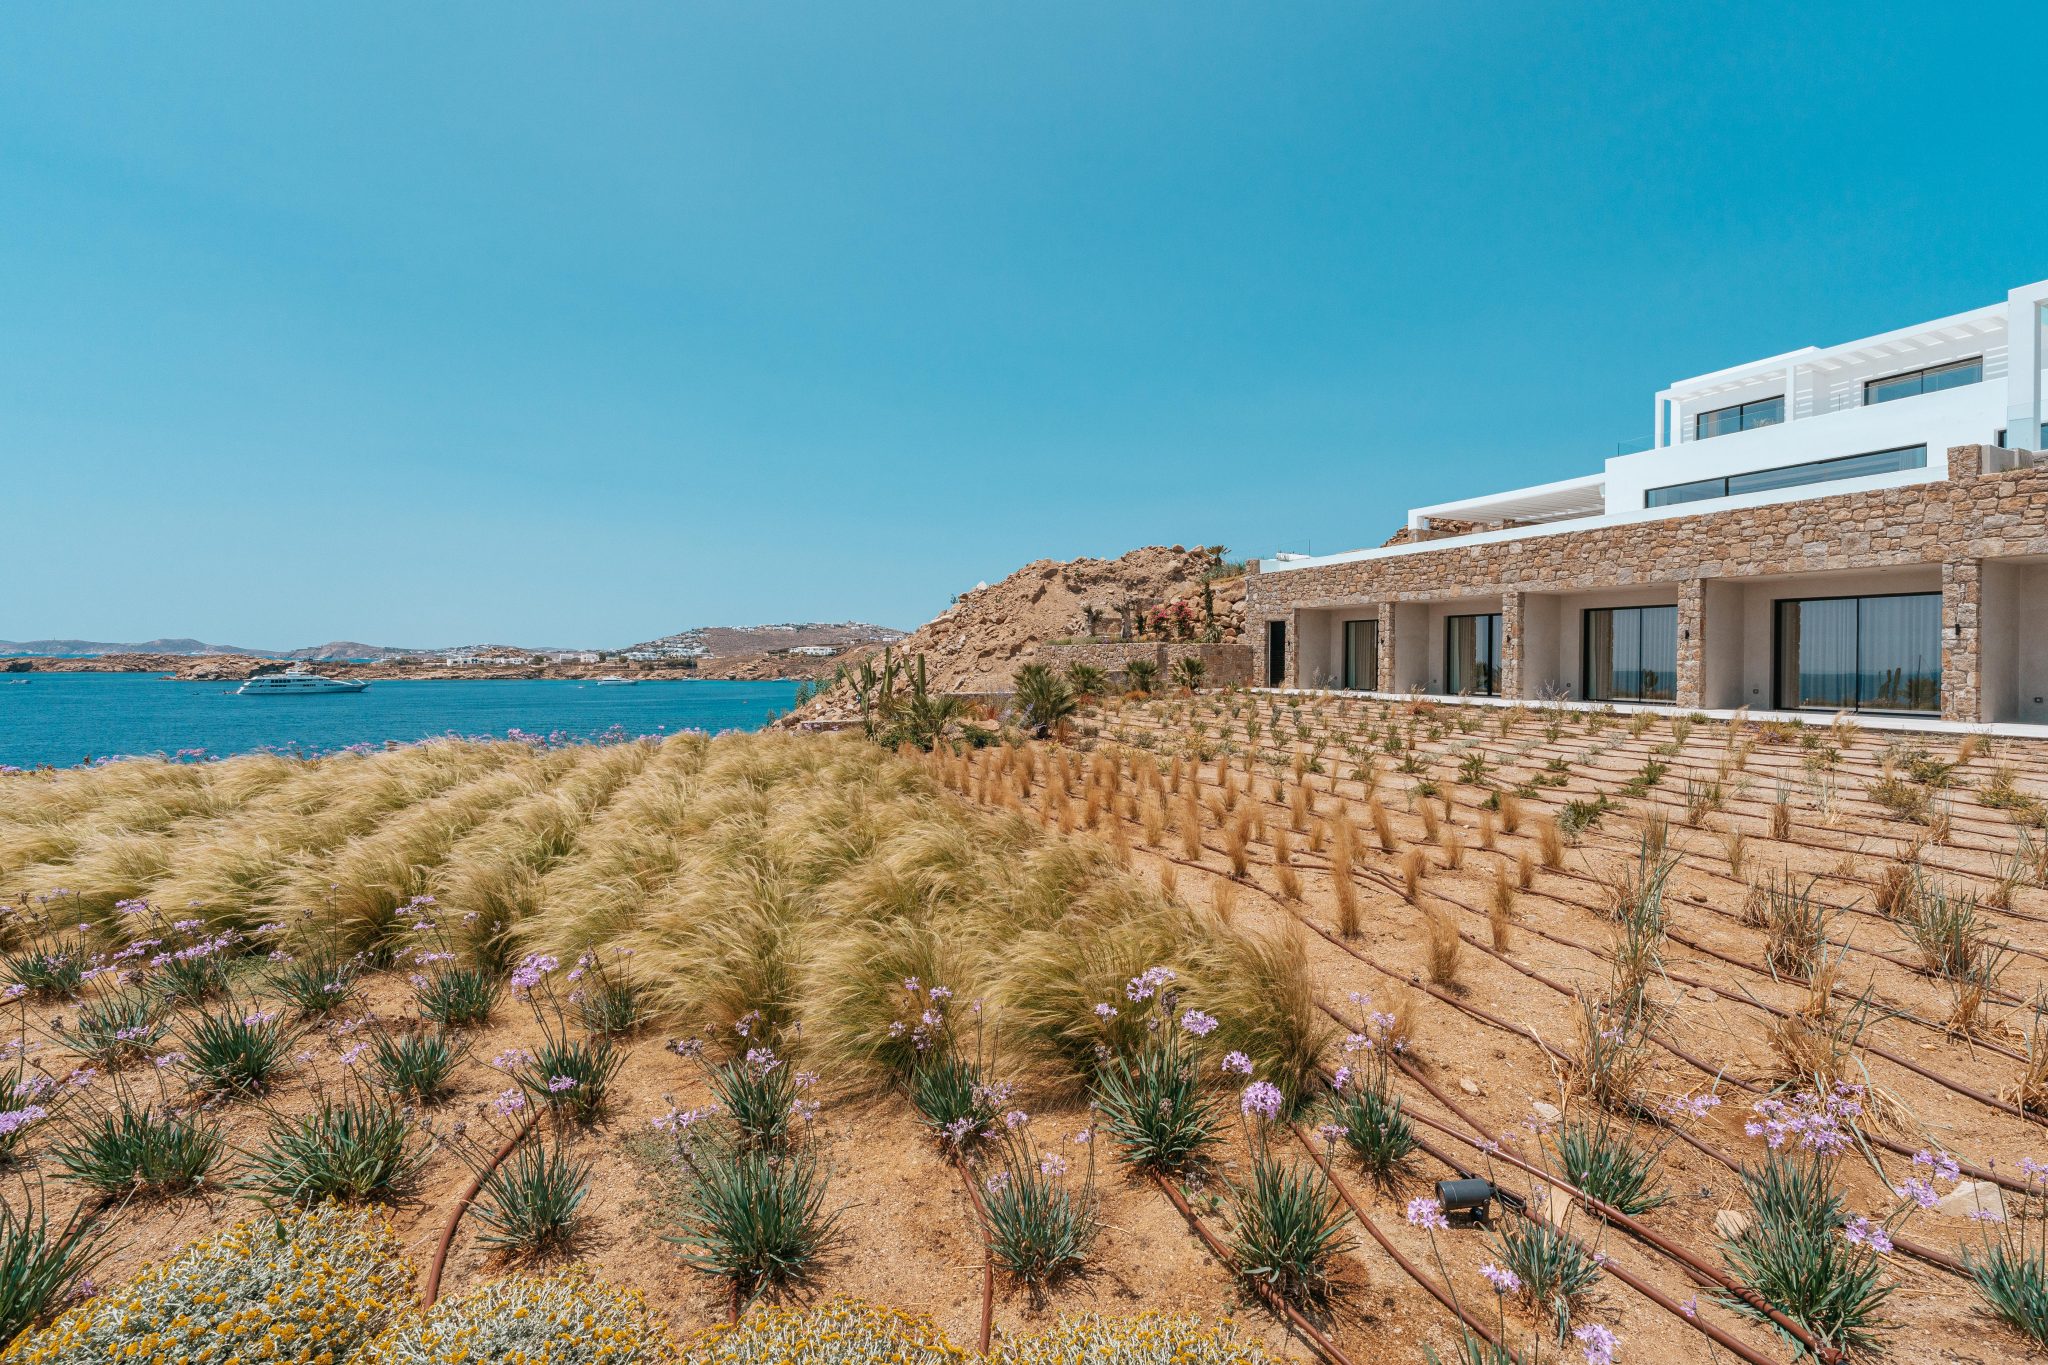 Villa Elysia in Super Paradise Beach-mykonos available for rent by Presidence